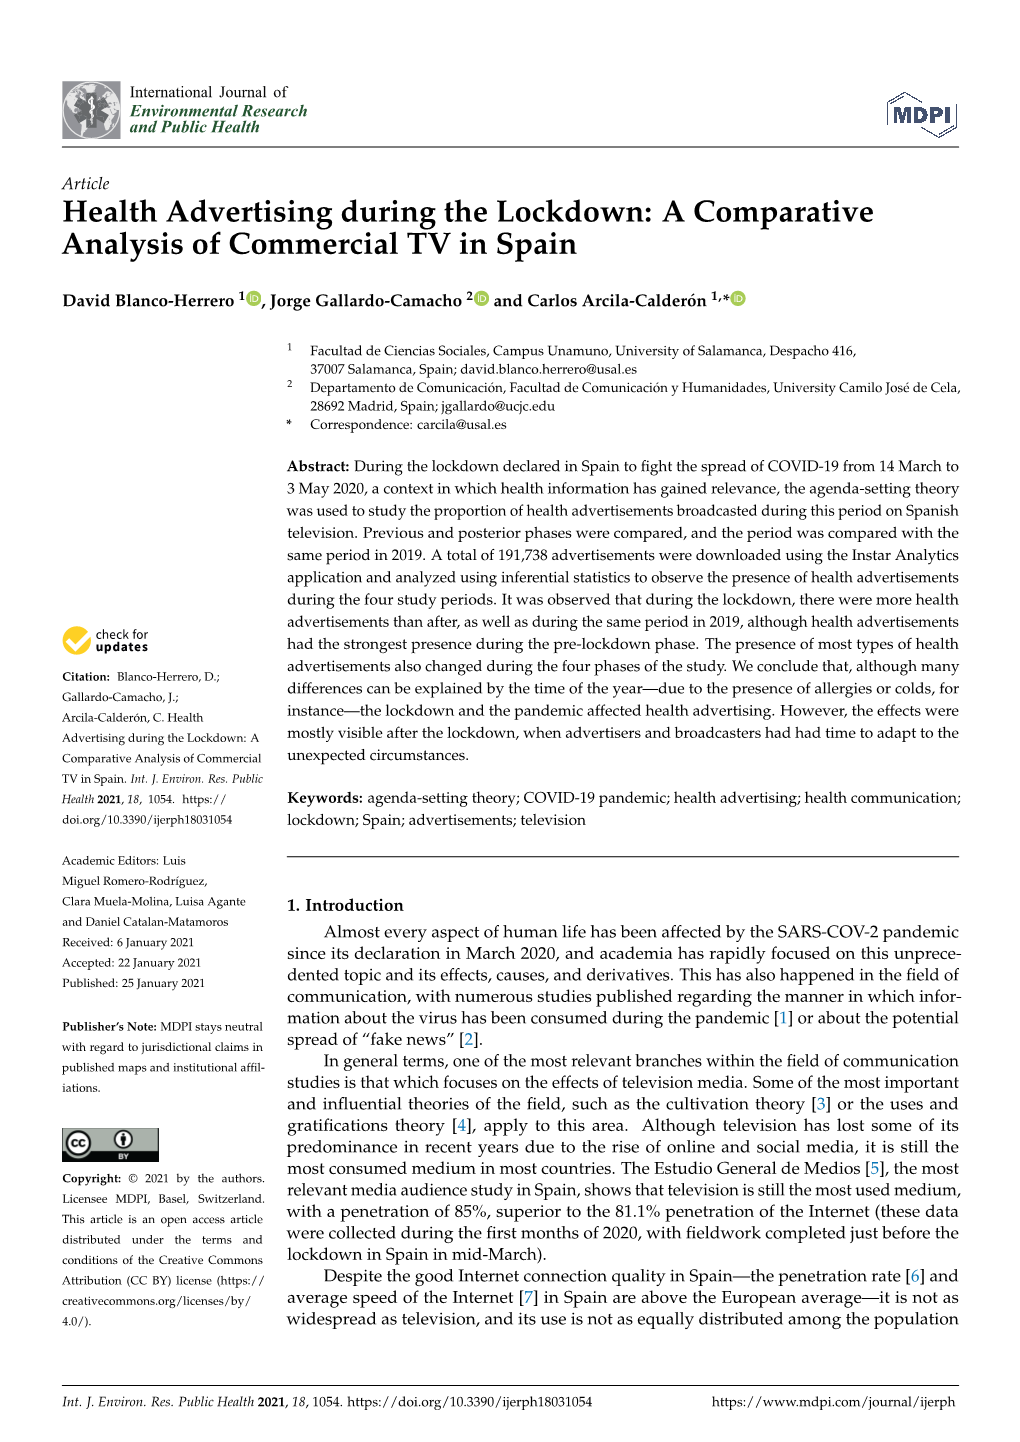 Health Advertising During the Lockdown: a Comparative Analysis of Commercial TV in Spain